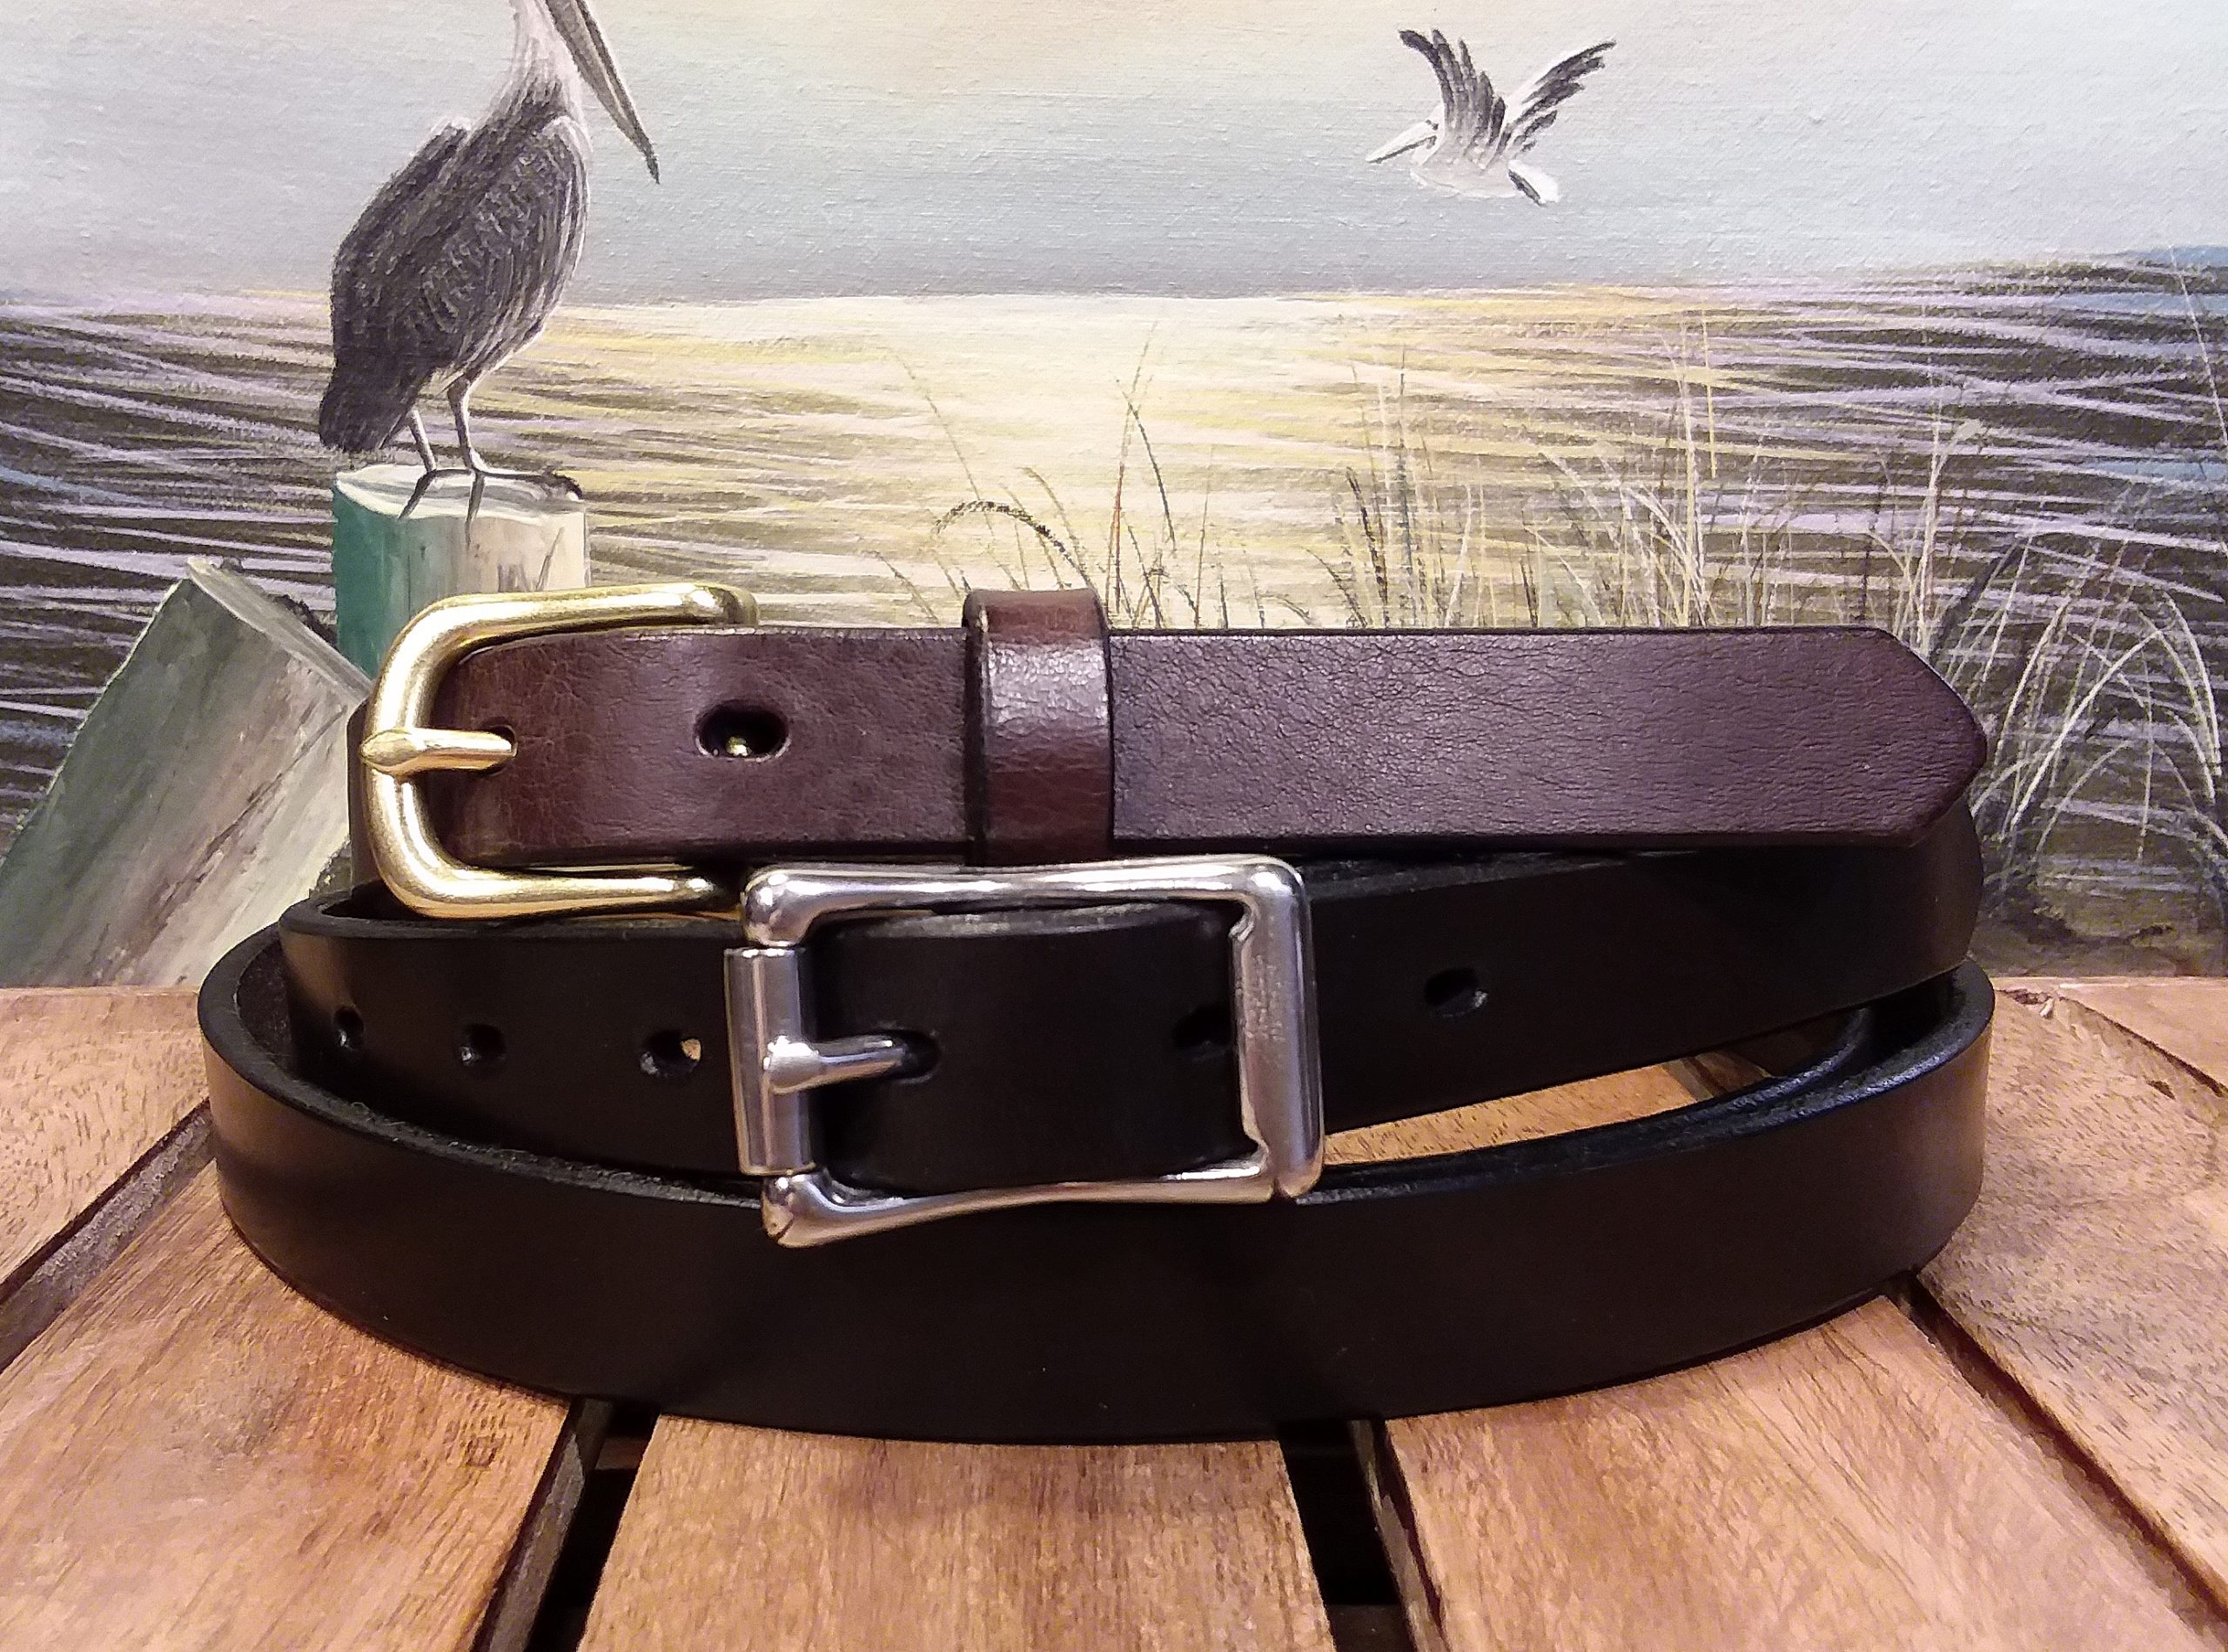 Skinny Thin Leather Belts